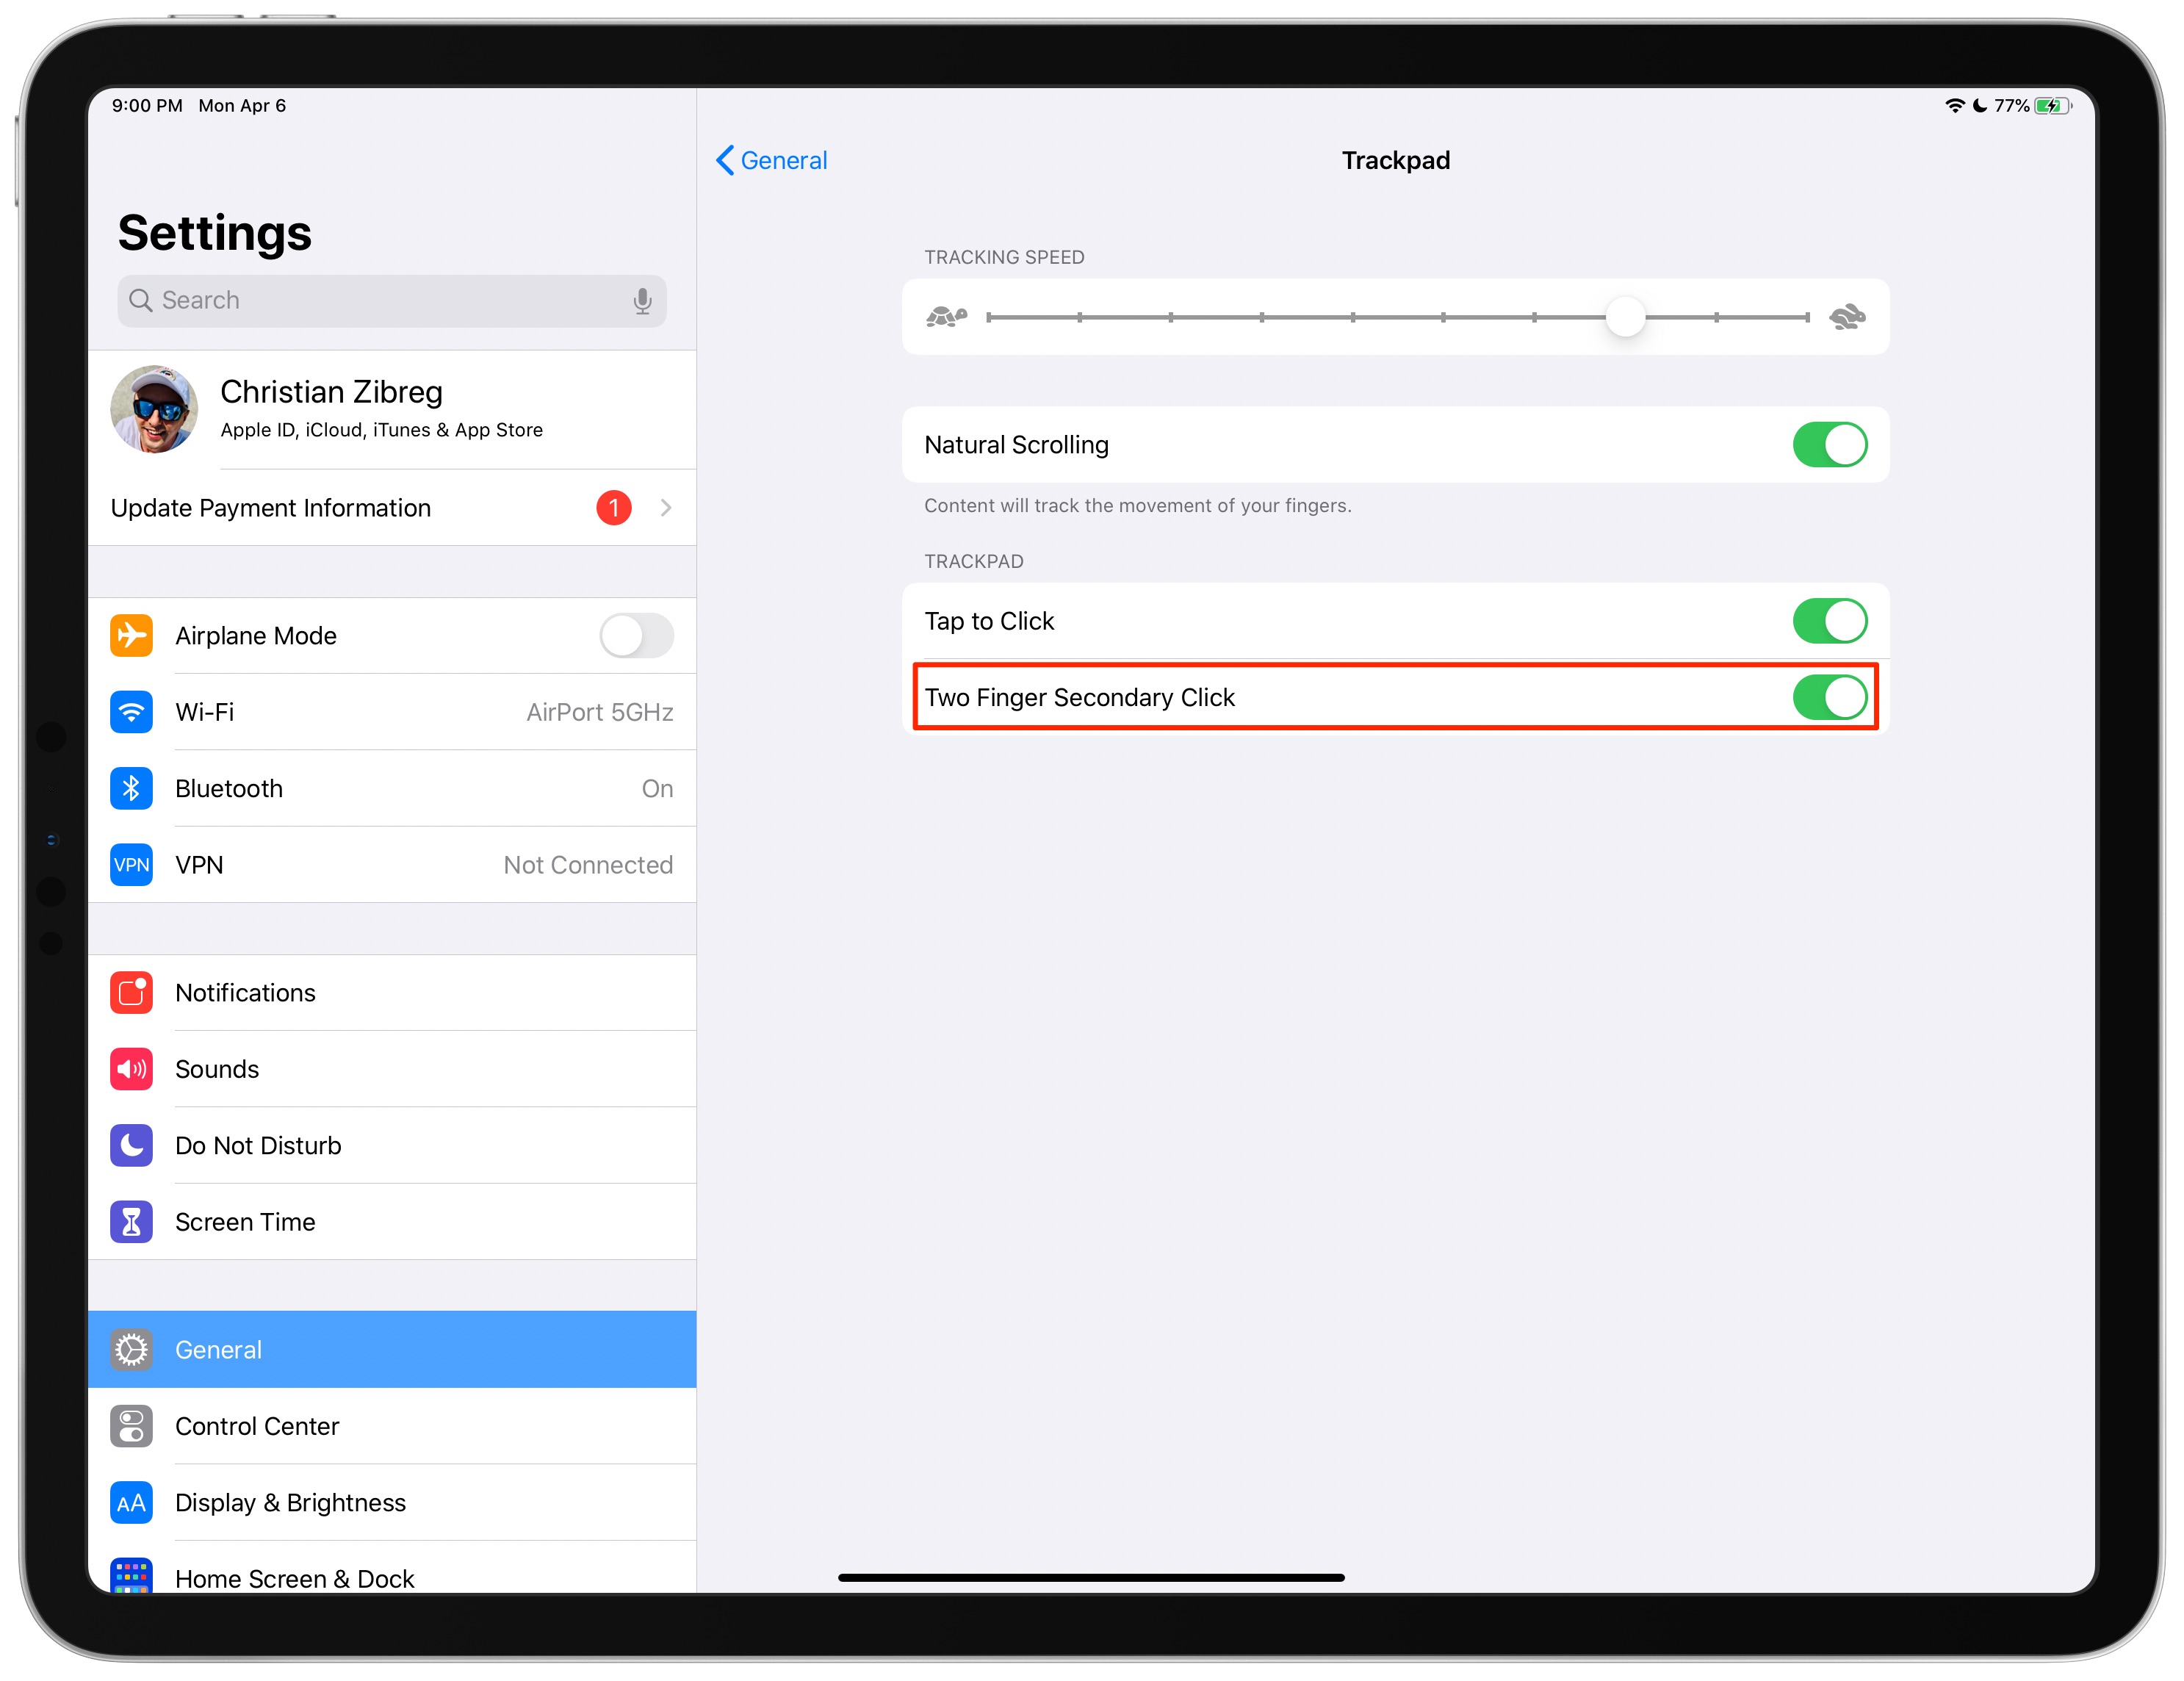 iPad trackpad gestures - two finger secondary click settings